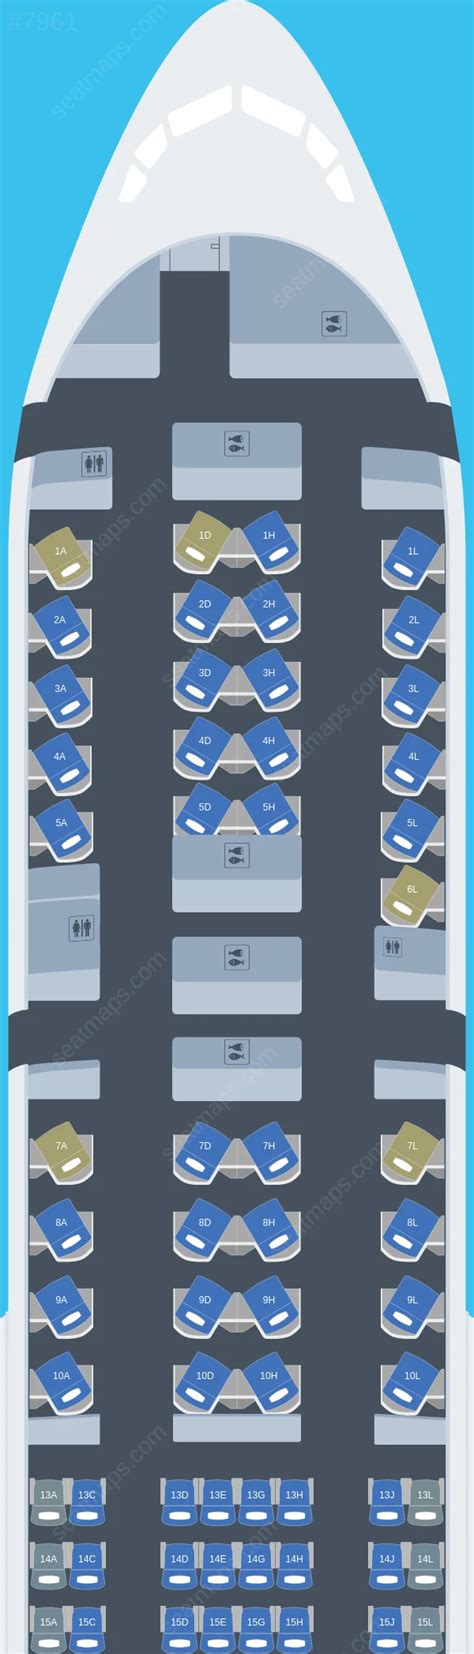 American Airlines New Seat Map Elcho Table